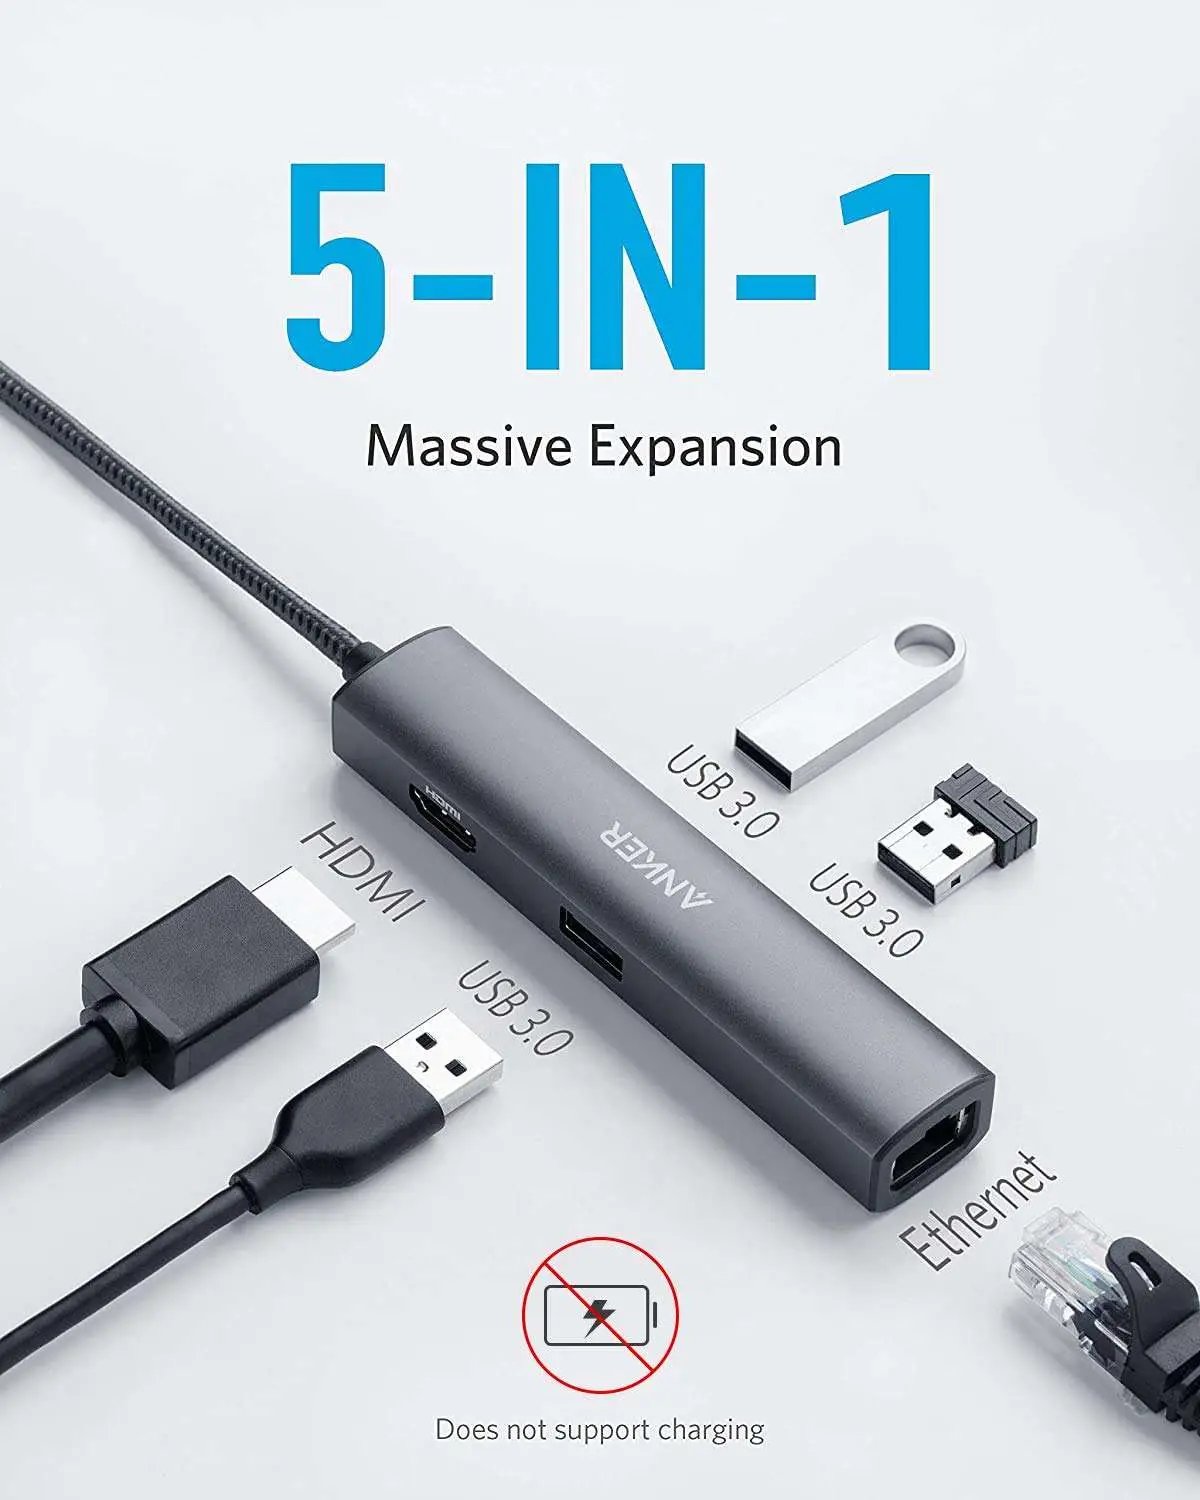 Anker USB C Hub Adapter, 5-in-1 USB C Adapter with 4K USB C to HDMI, Ethernet Port, 3 USB 3.0 Ports, for MacBook Pro, iPad Pro, XPS, Pixelbook, and More - A83380A1 - Hatke